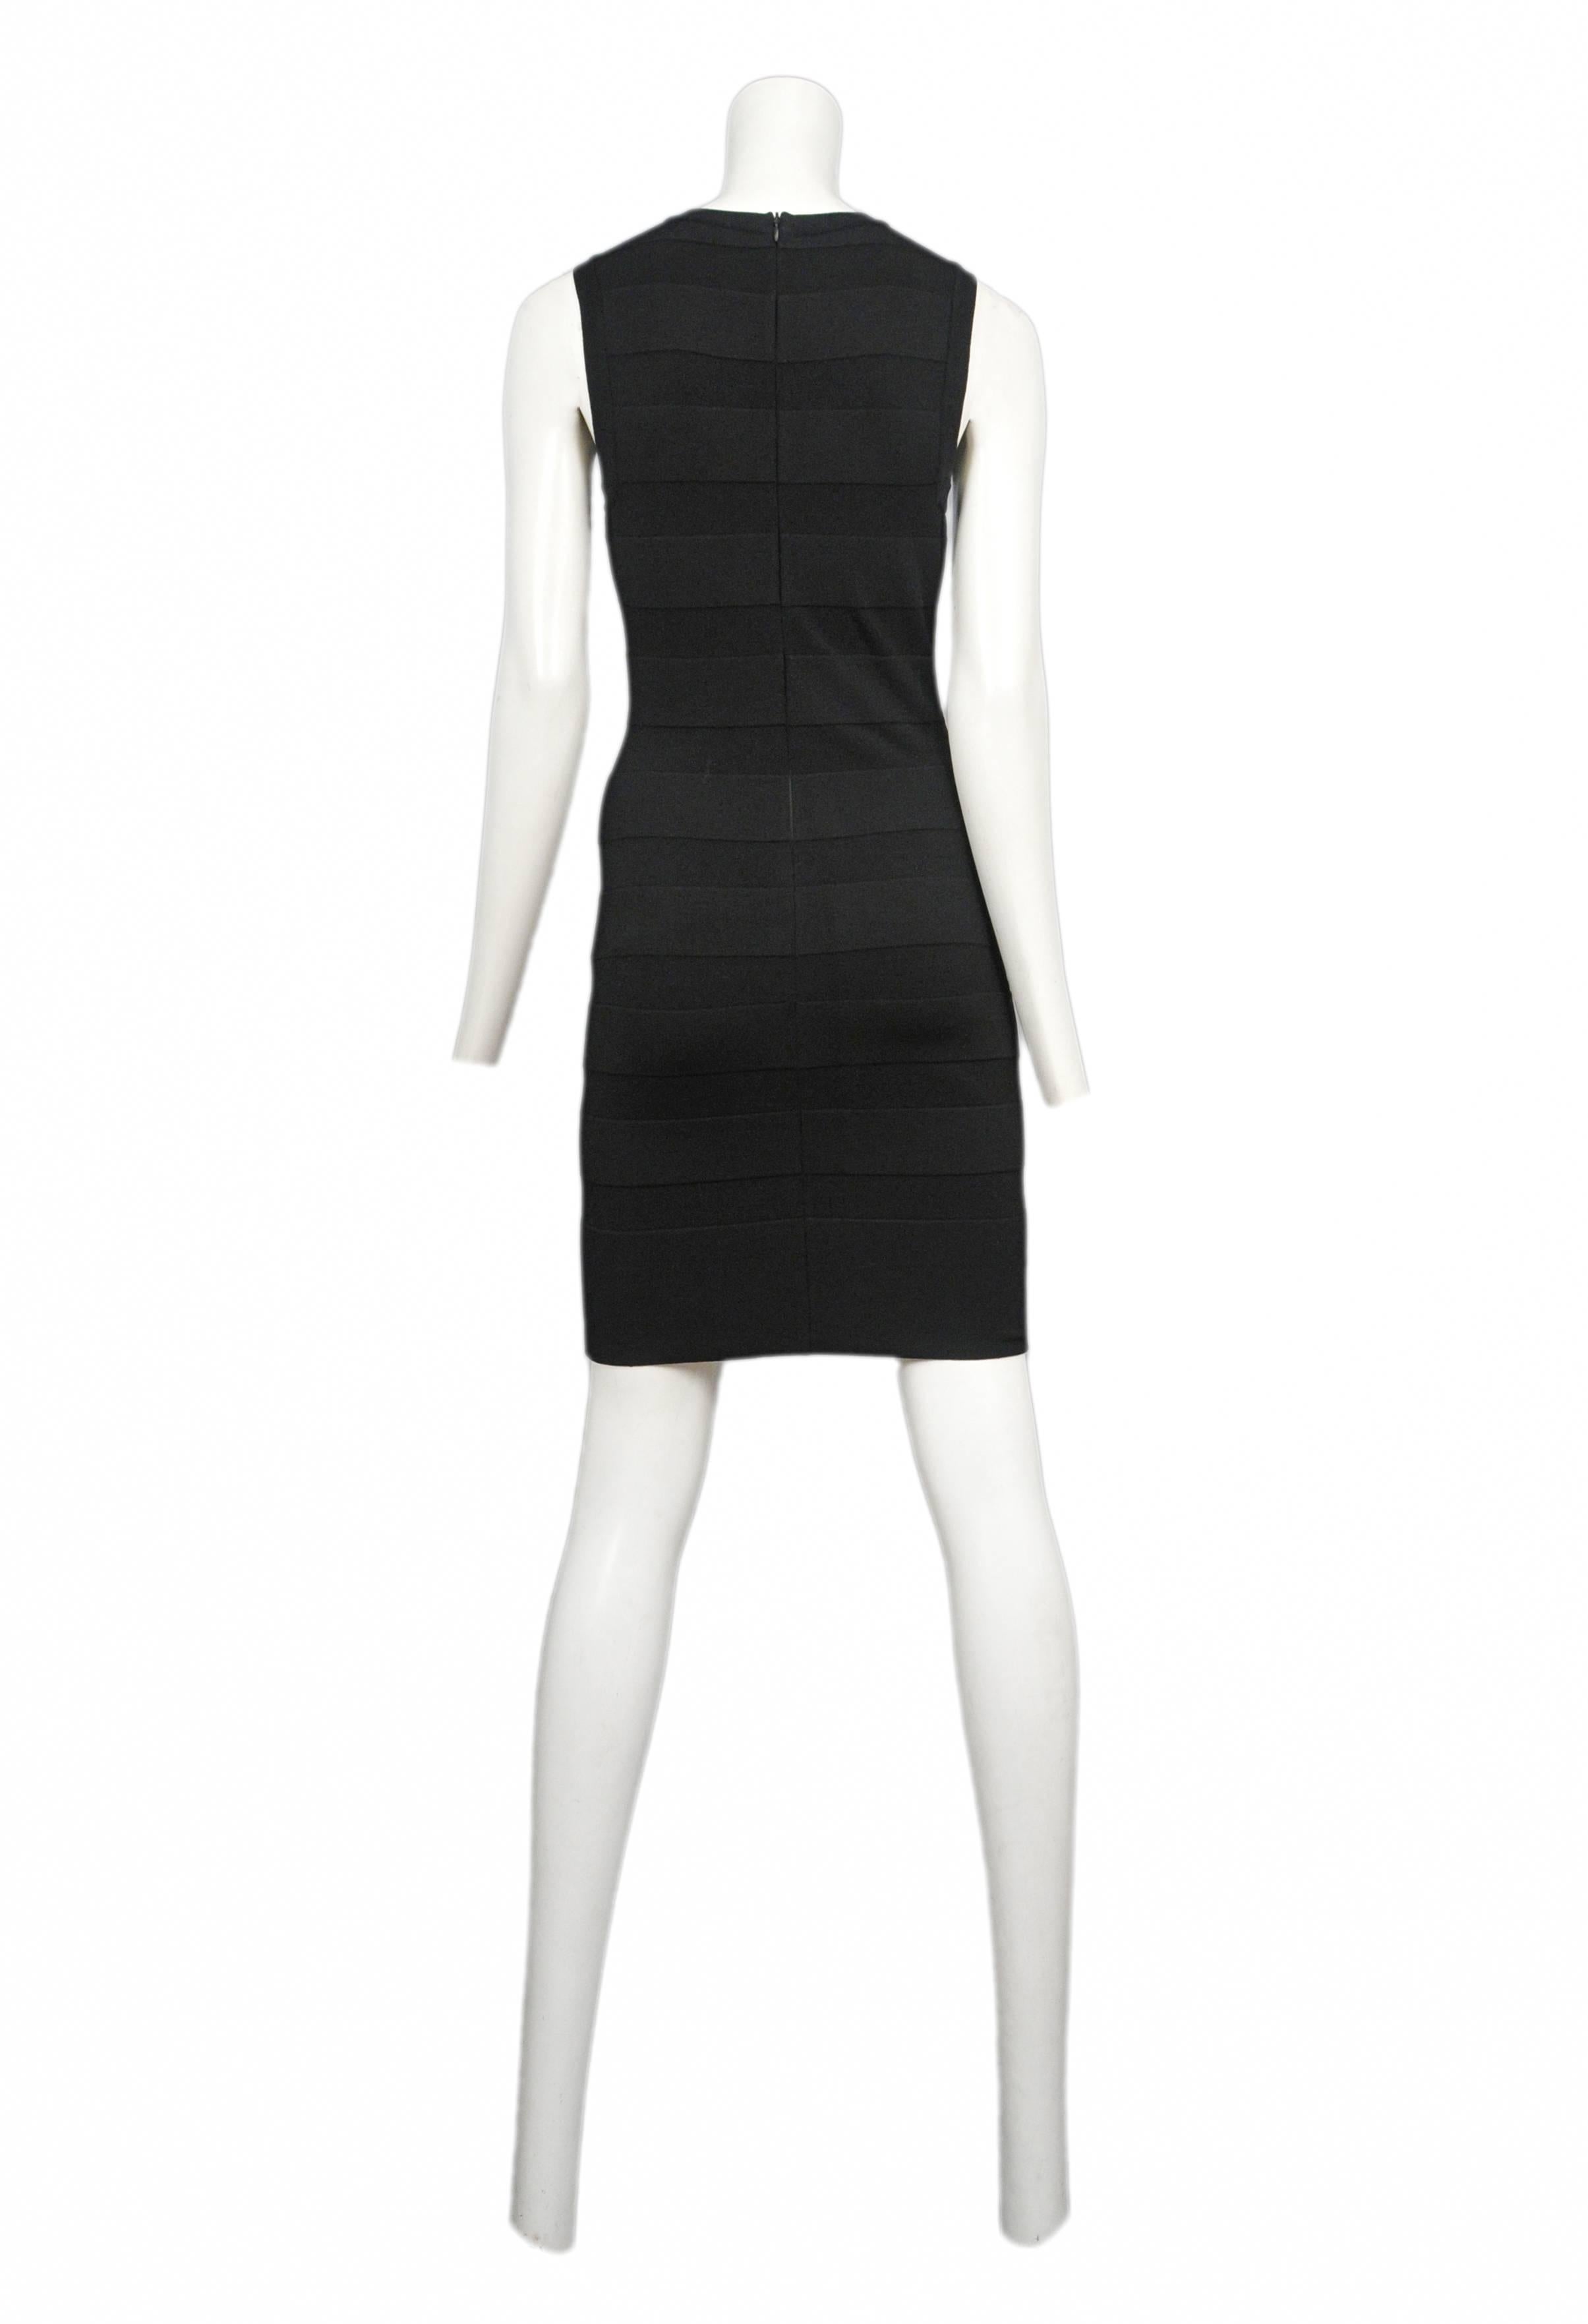 ALAIA Black Panel Dress In Excellent Condition In Los Angeles, CA